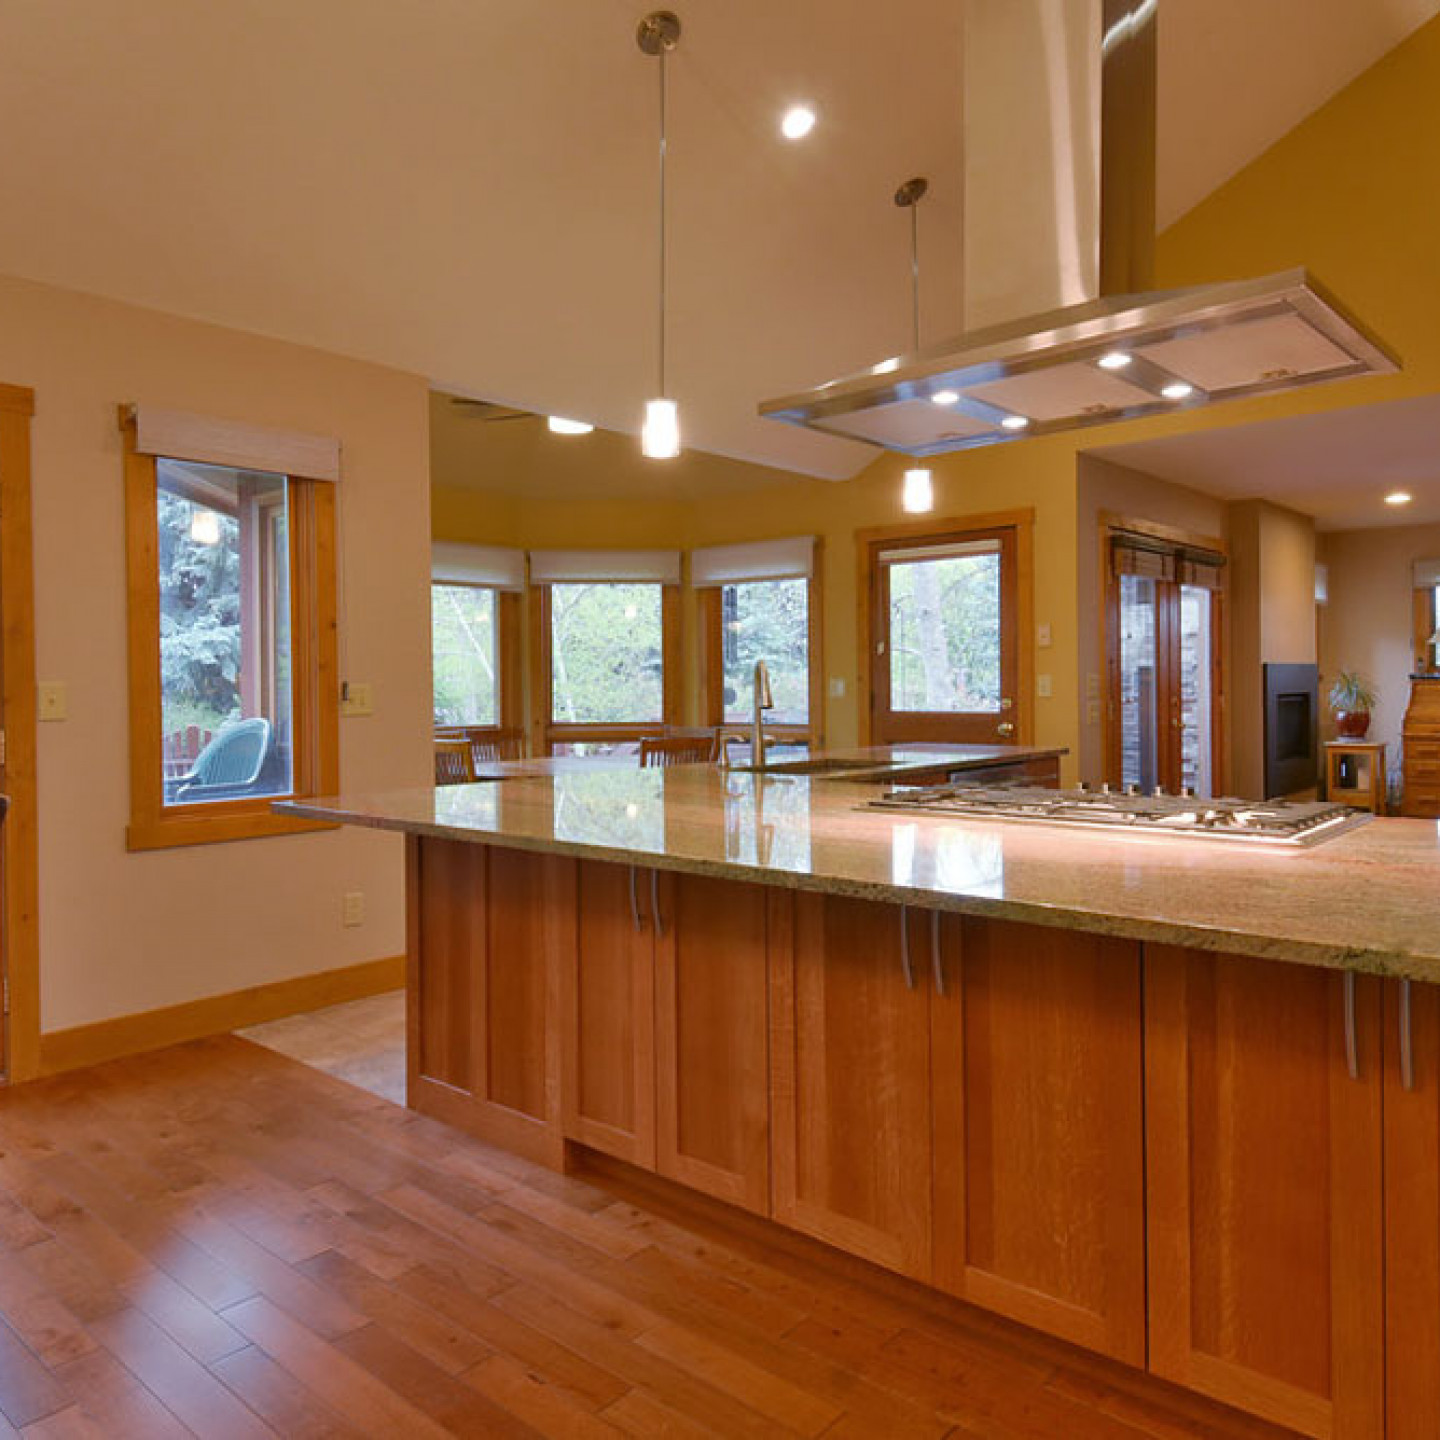 Kitchen Remodel | Remodeling Contractor in Fort Collins & Loveland, CO |  DPM Construction LLC